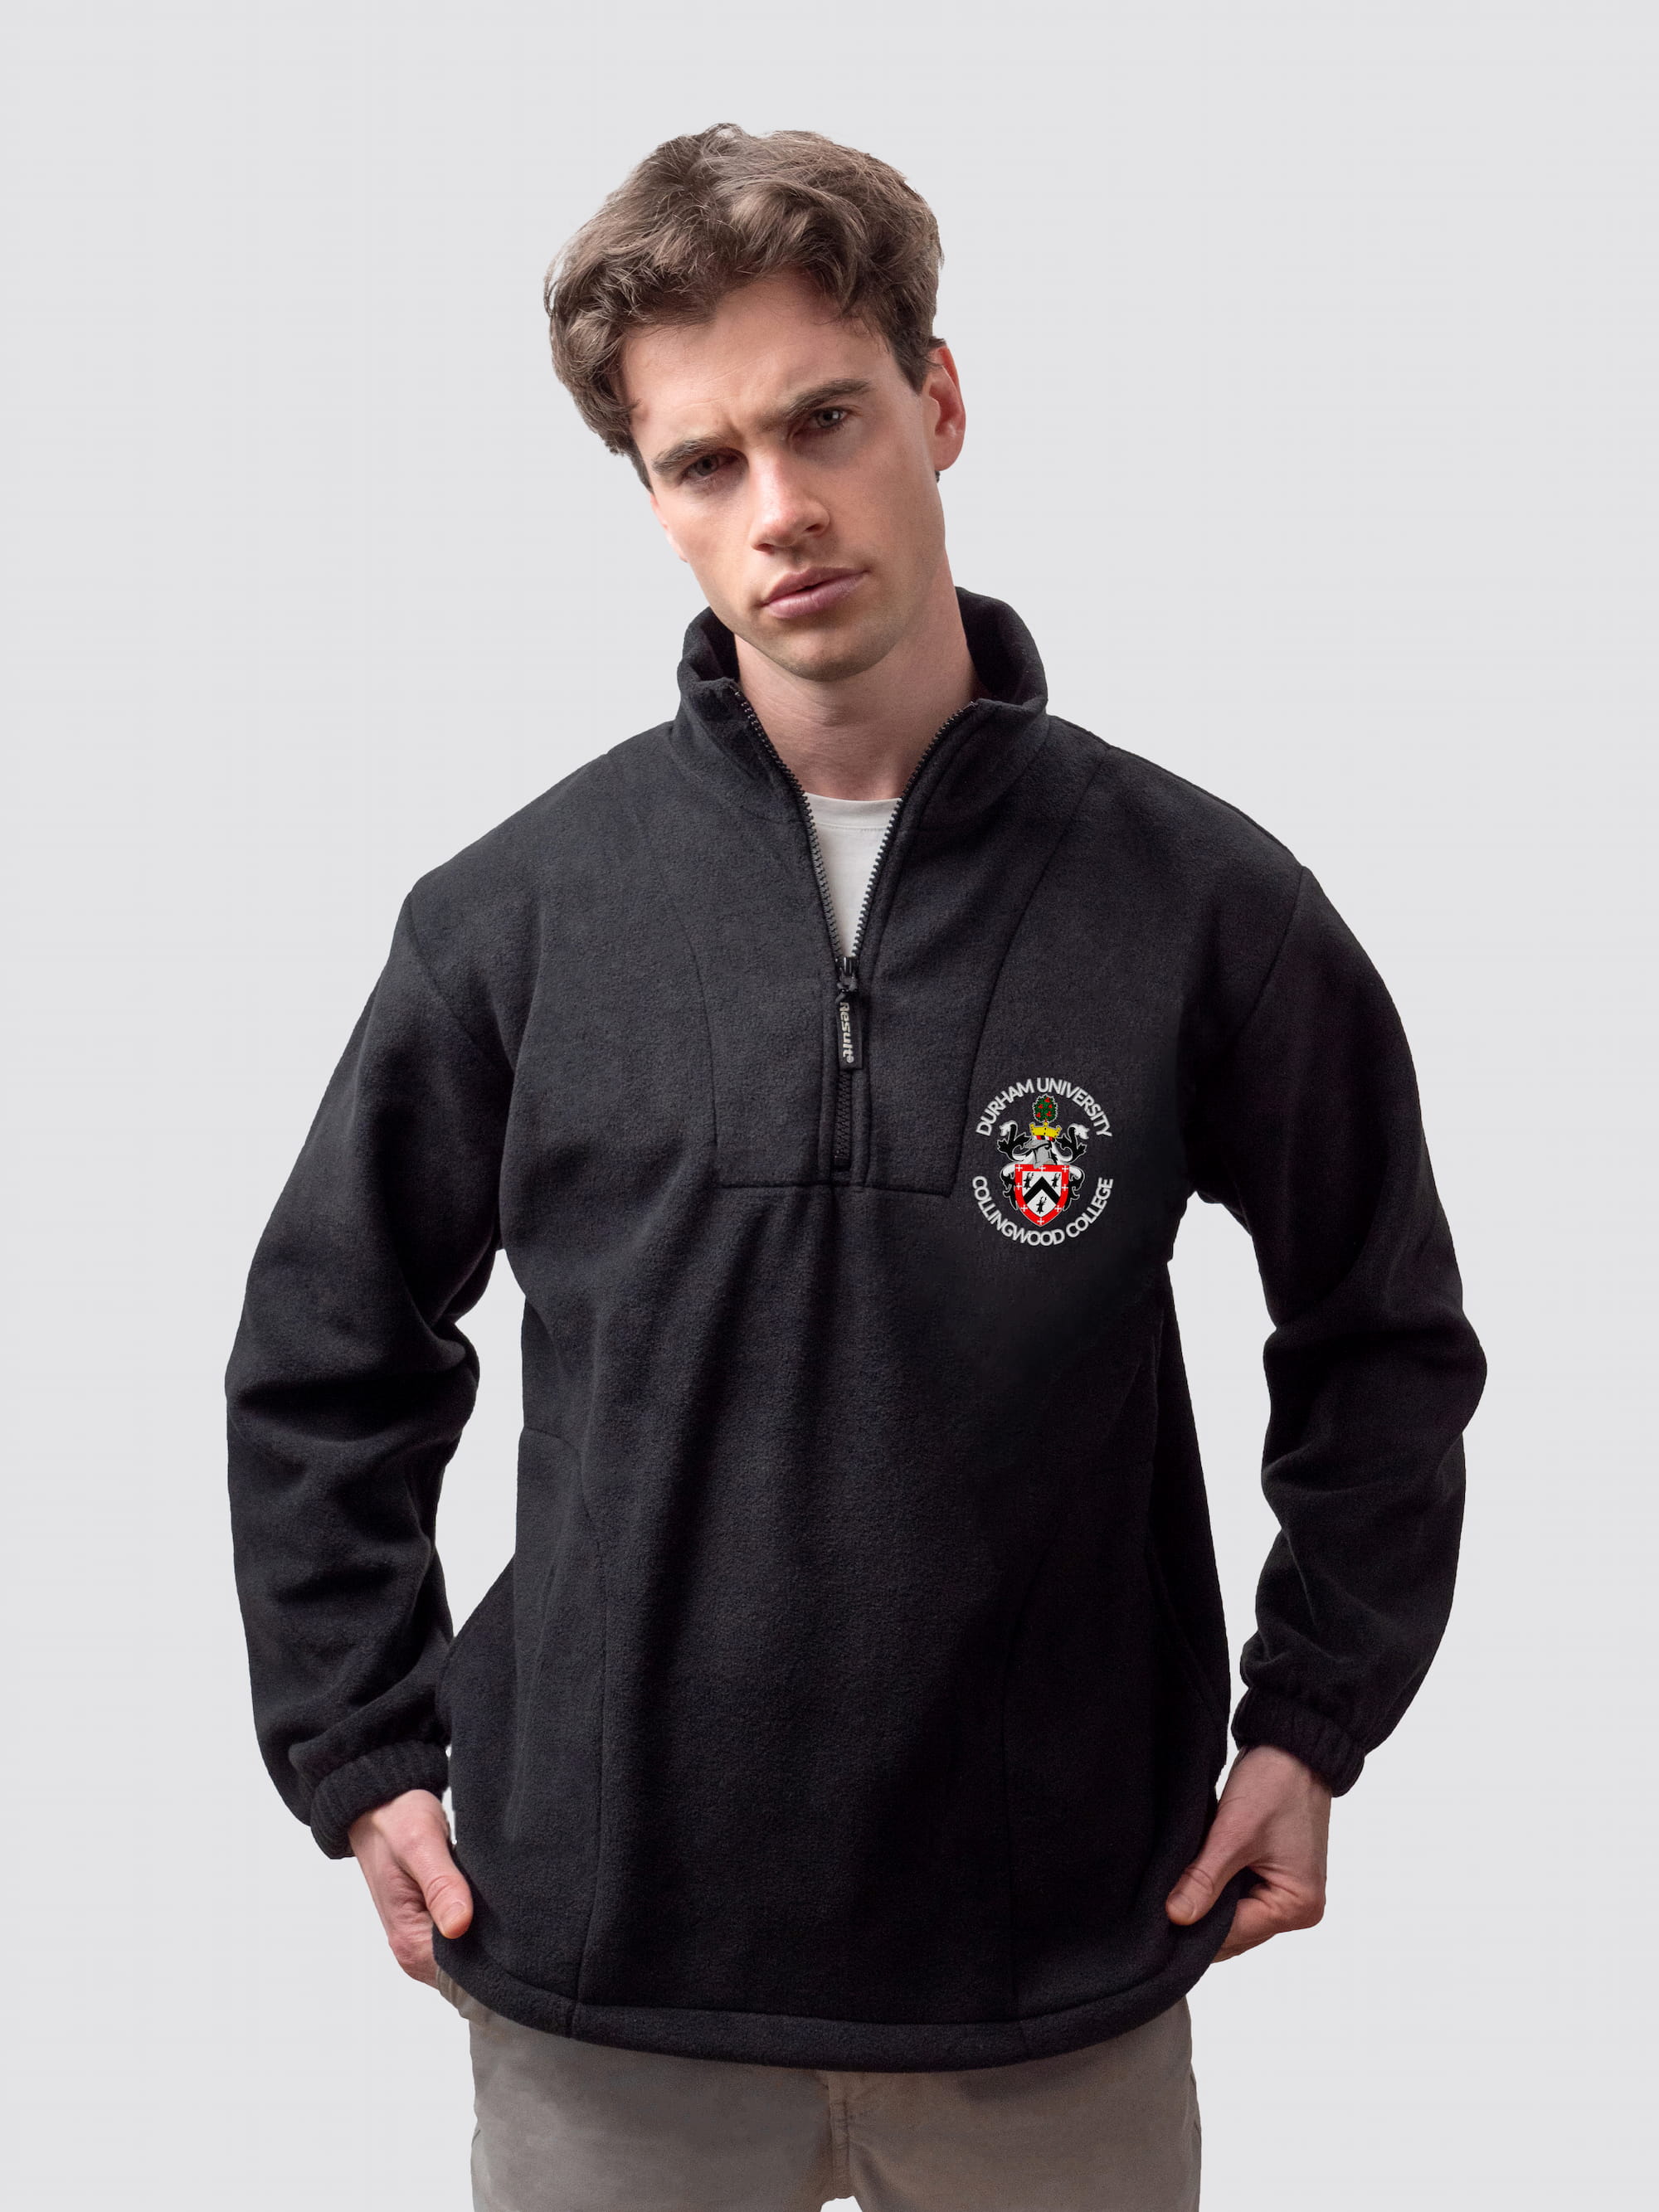 Durham university fleece, with custom embroidered initials and Collingwood crest